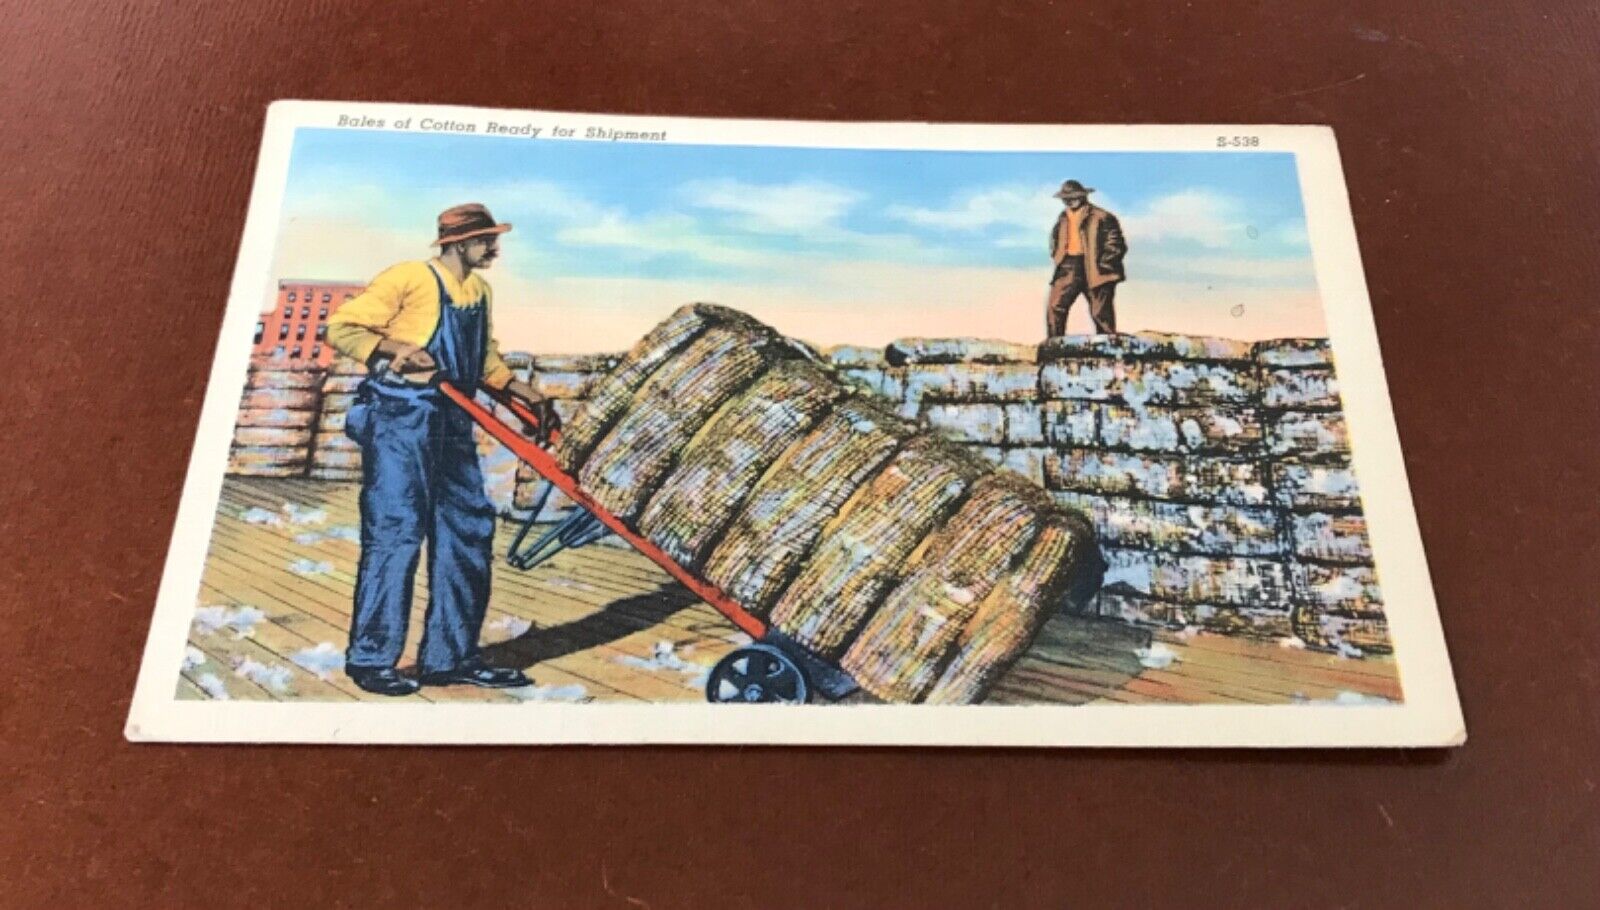 VTG Postcard...1942..Bales of Cotton Ready for Shipment..Posted